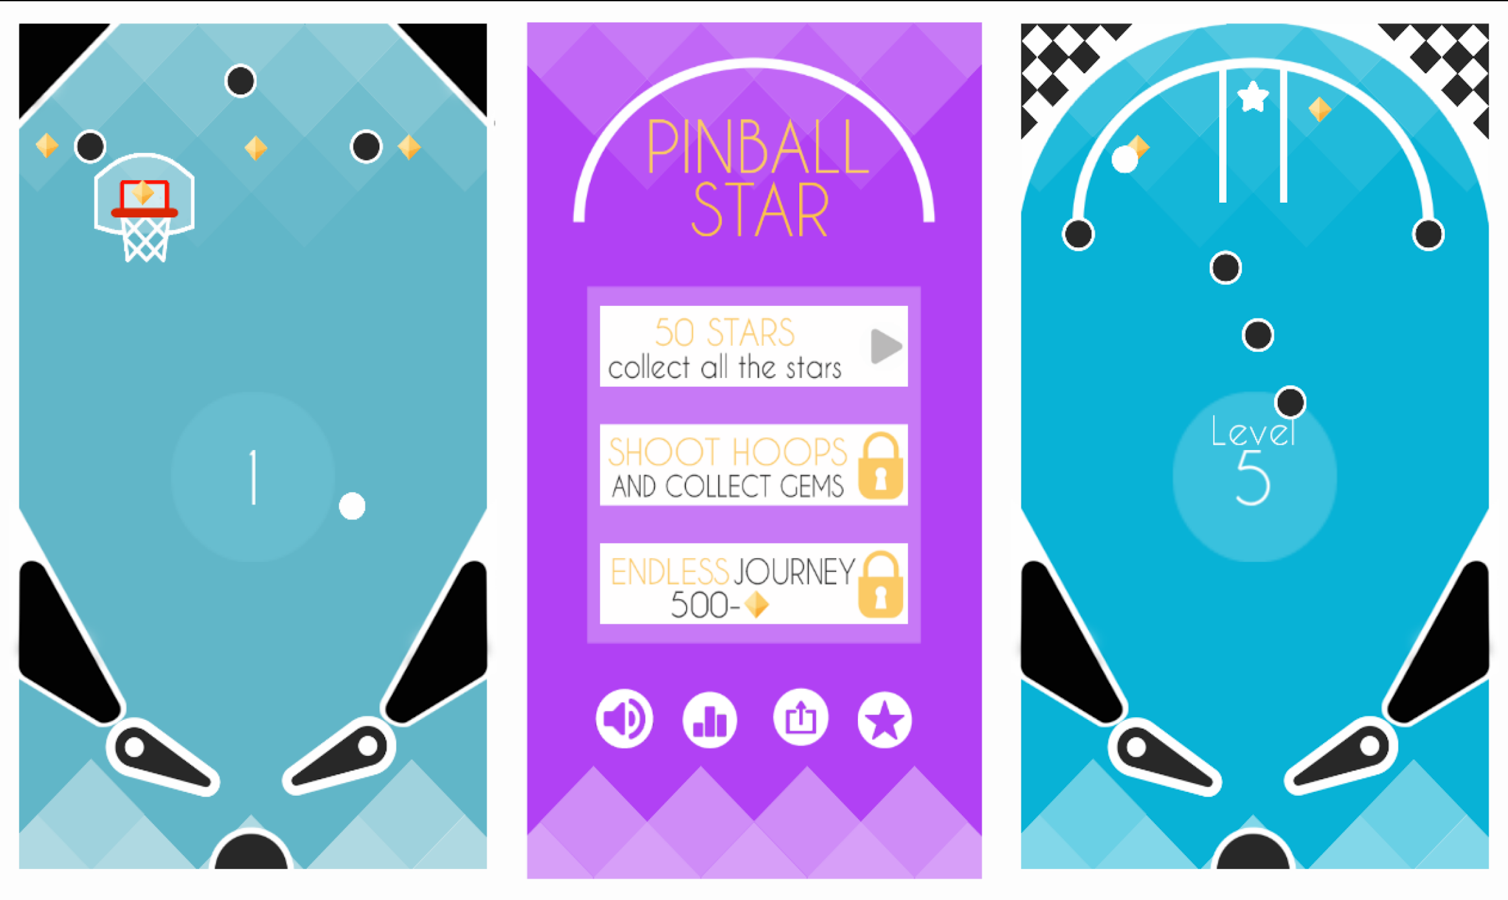 Pinball Star download the new version for android